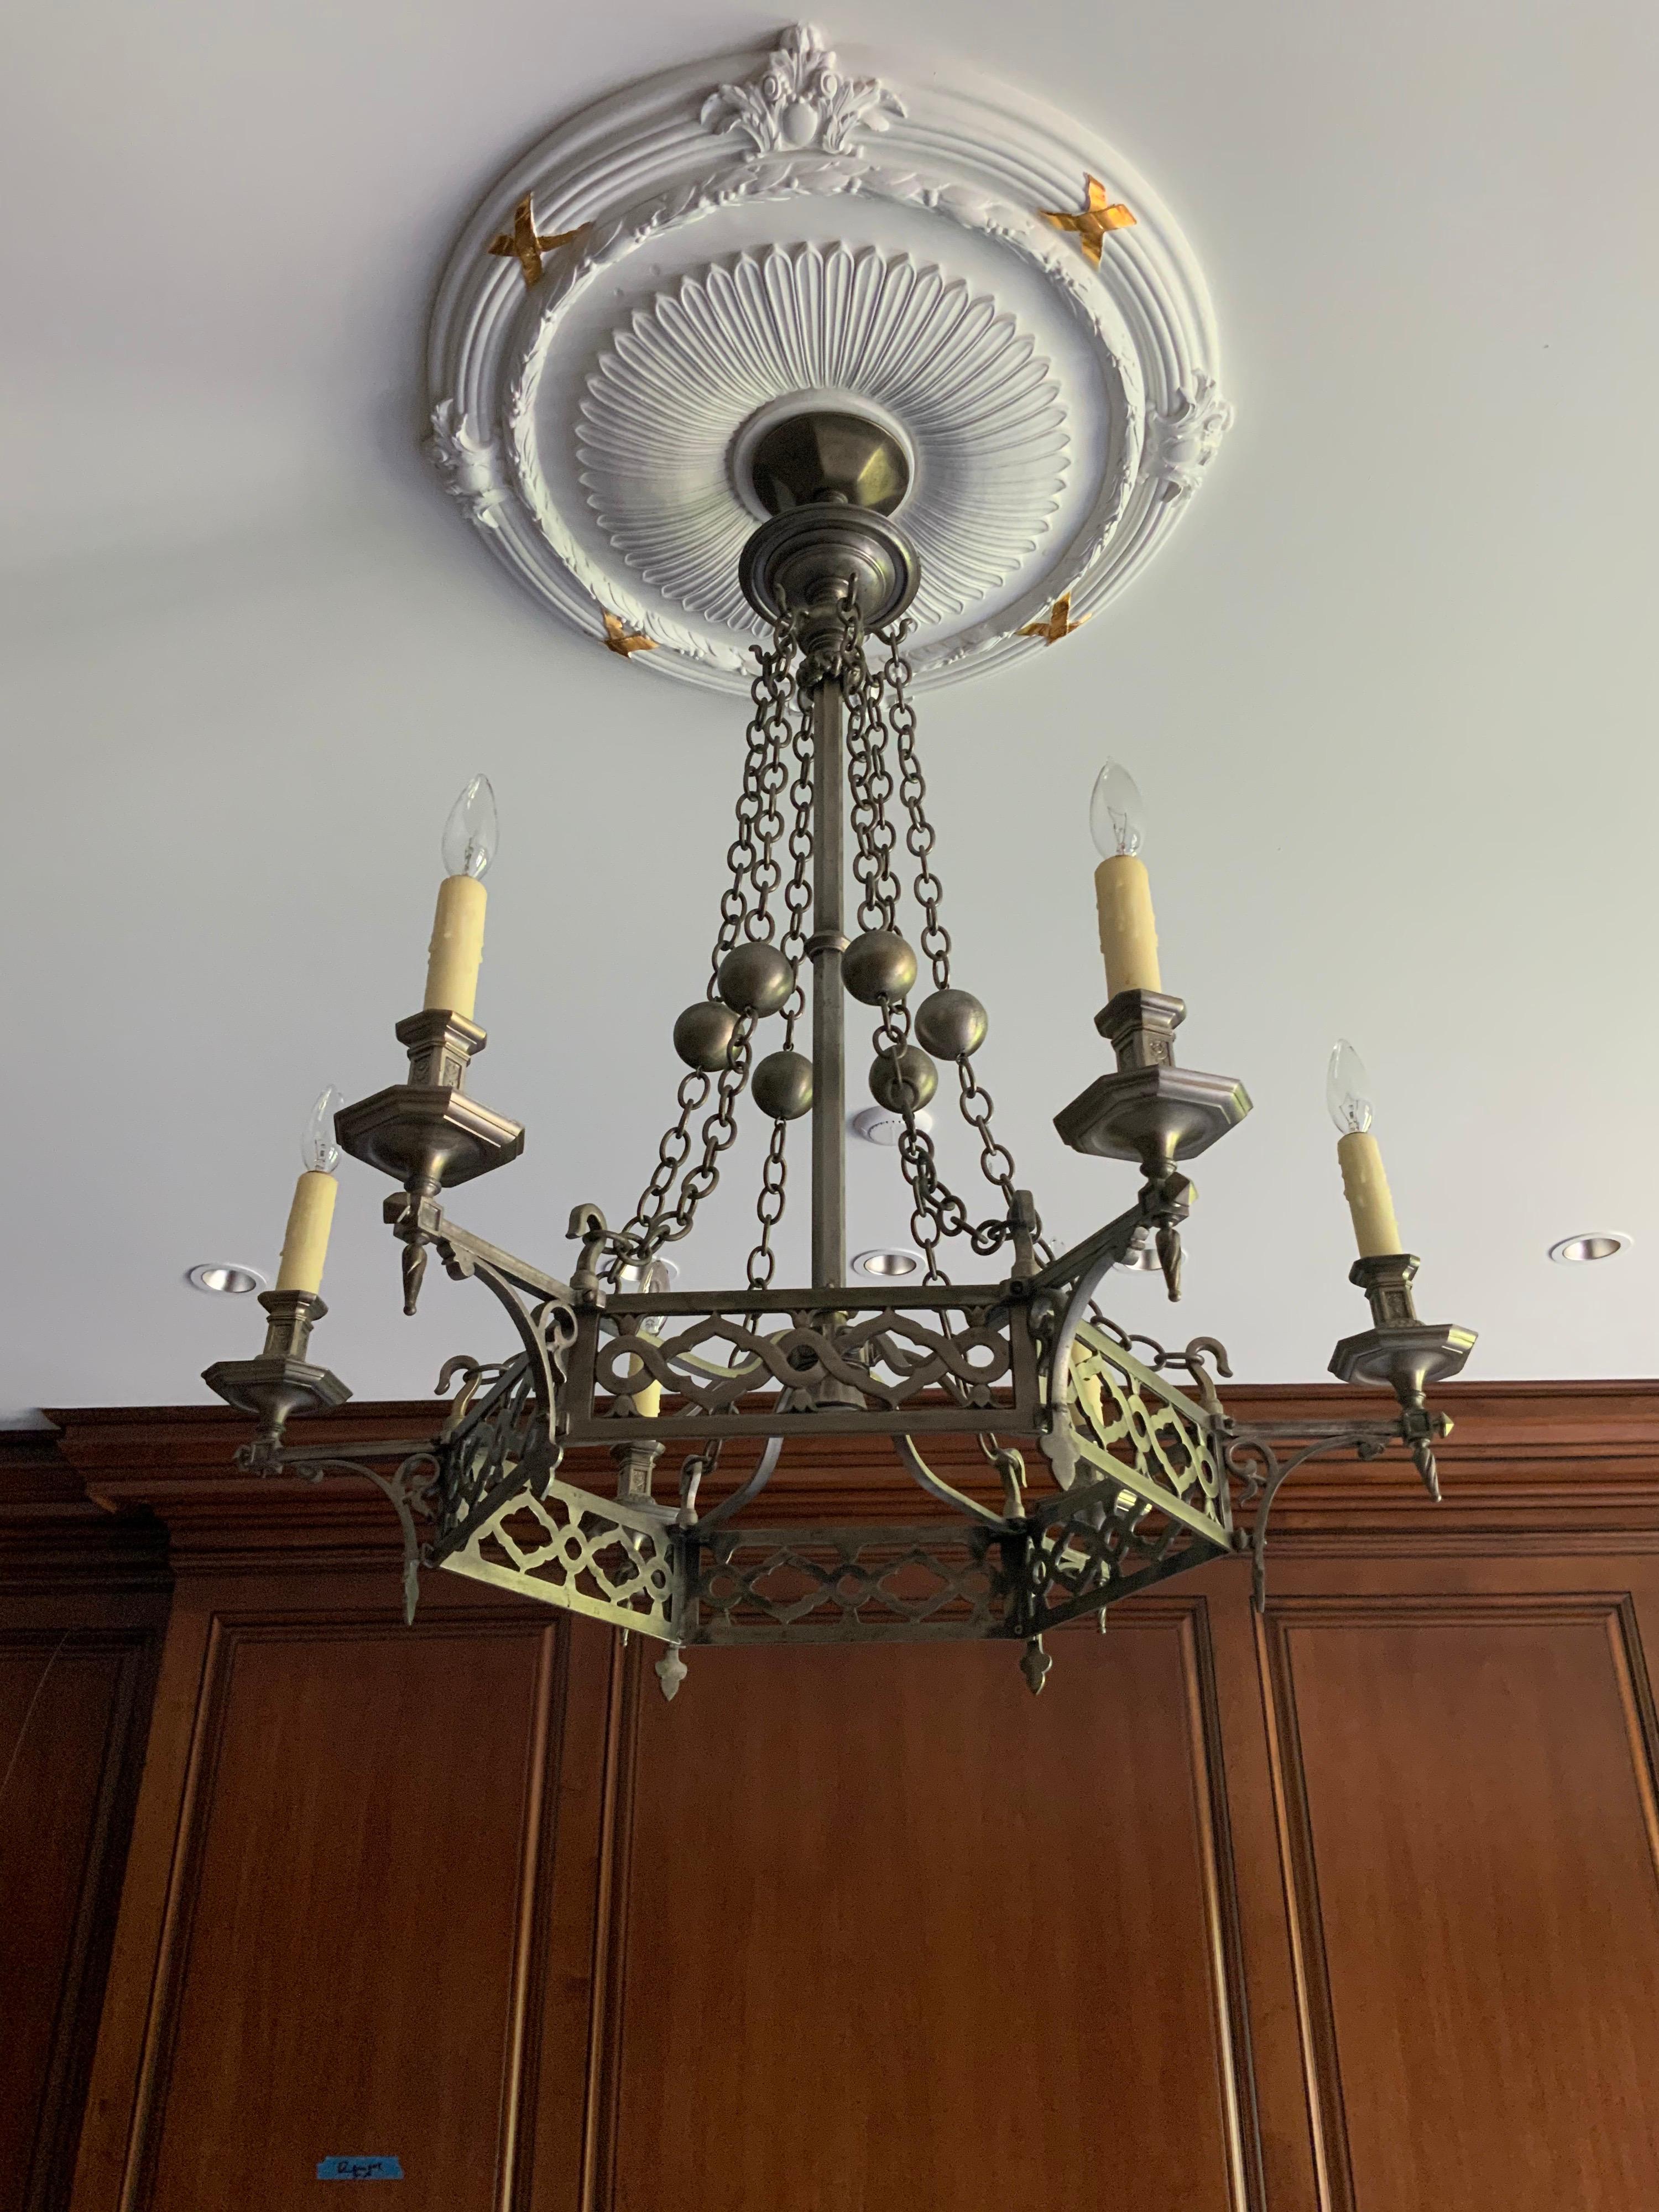 This brass chandelier origins from France.

19th century period.